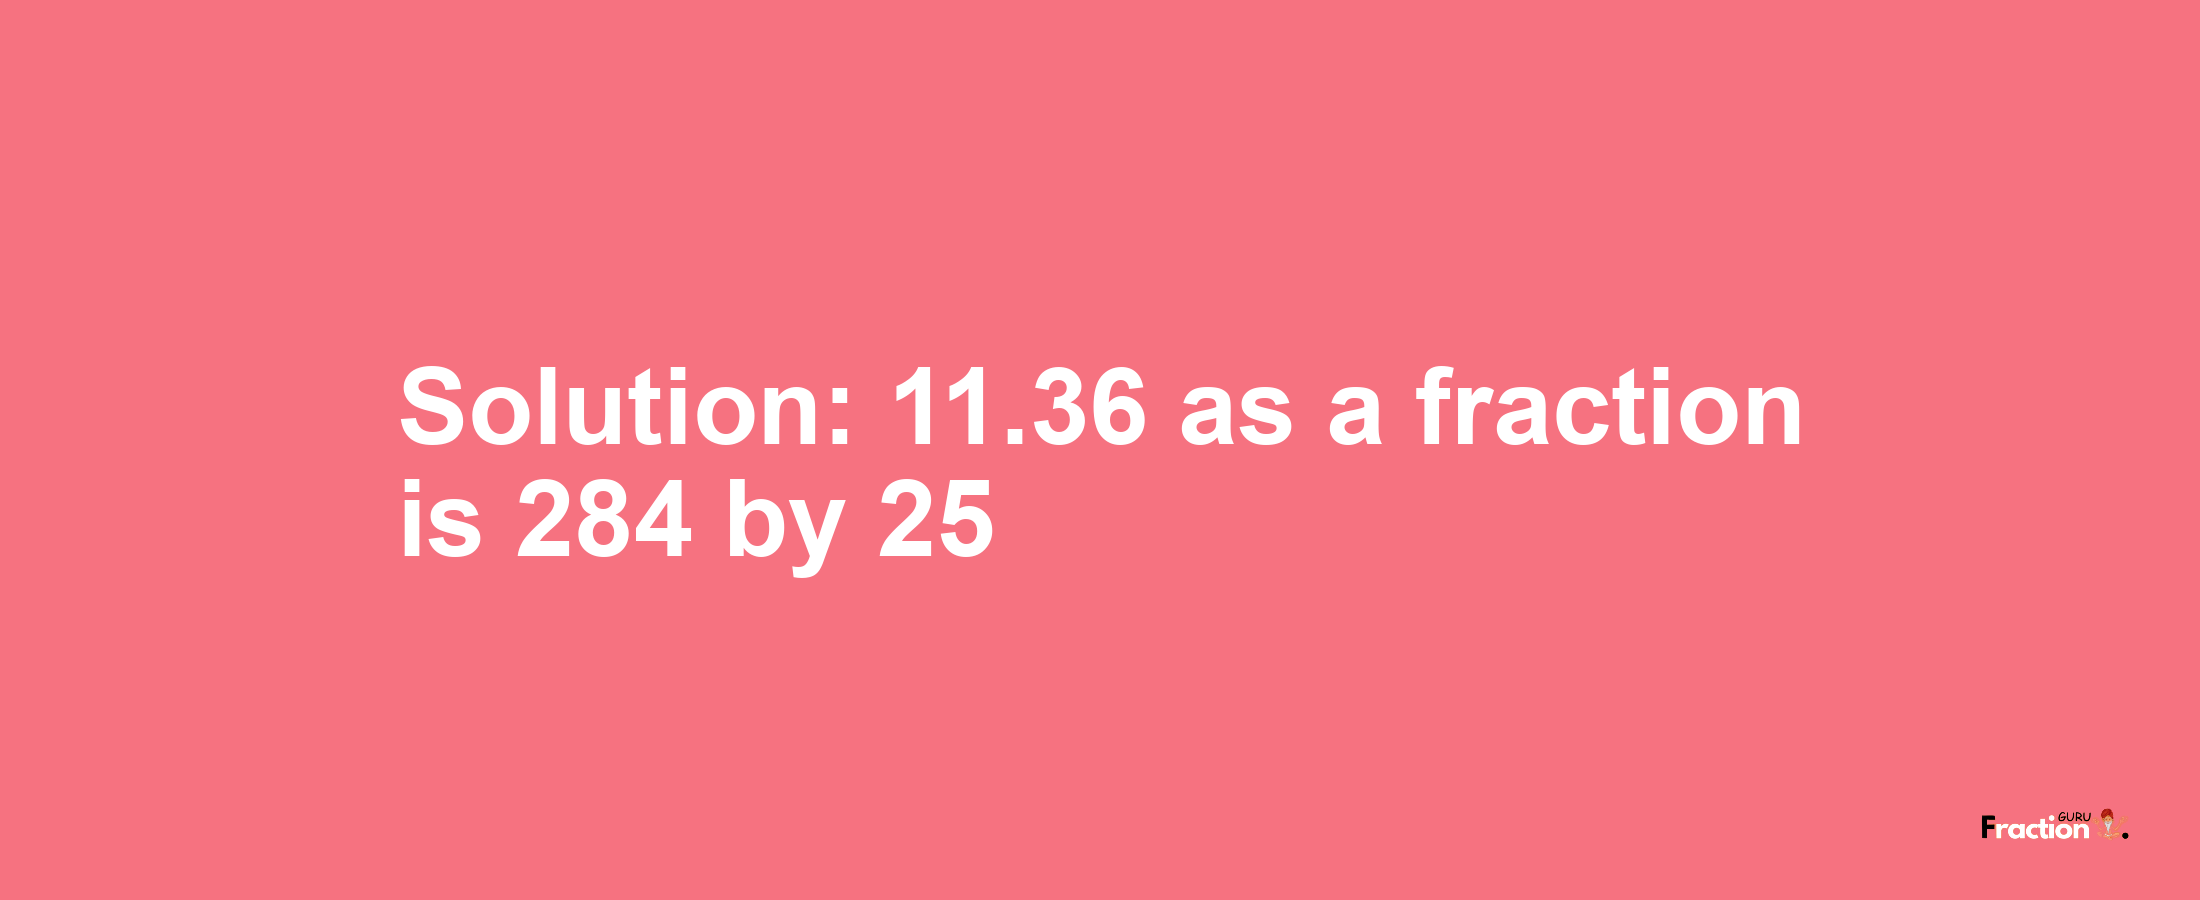 Solution:11.36 as a fraction is 284/25